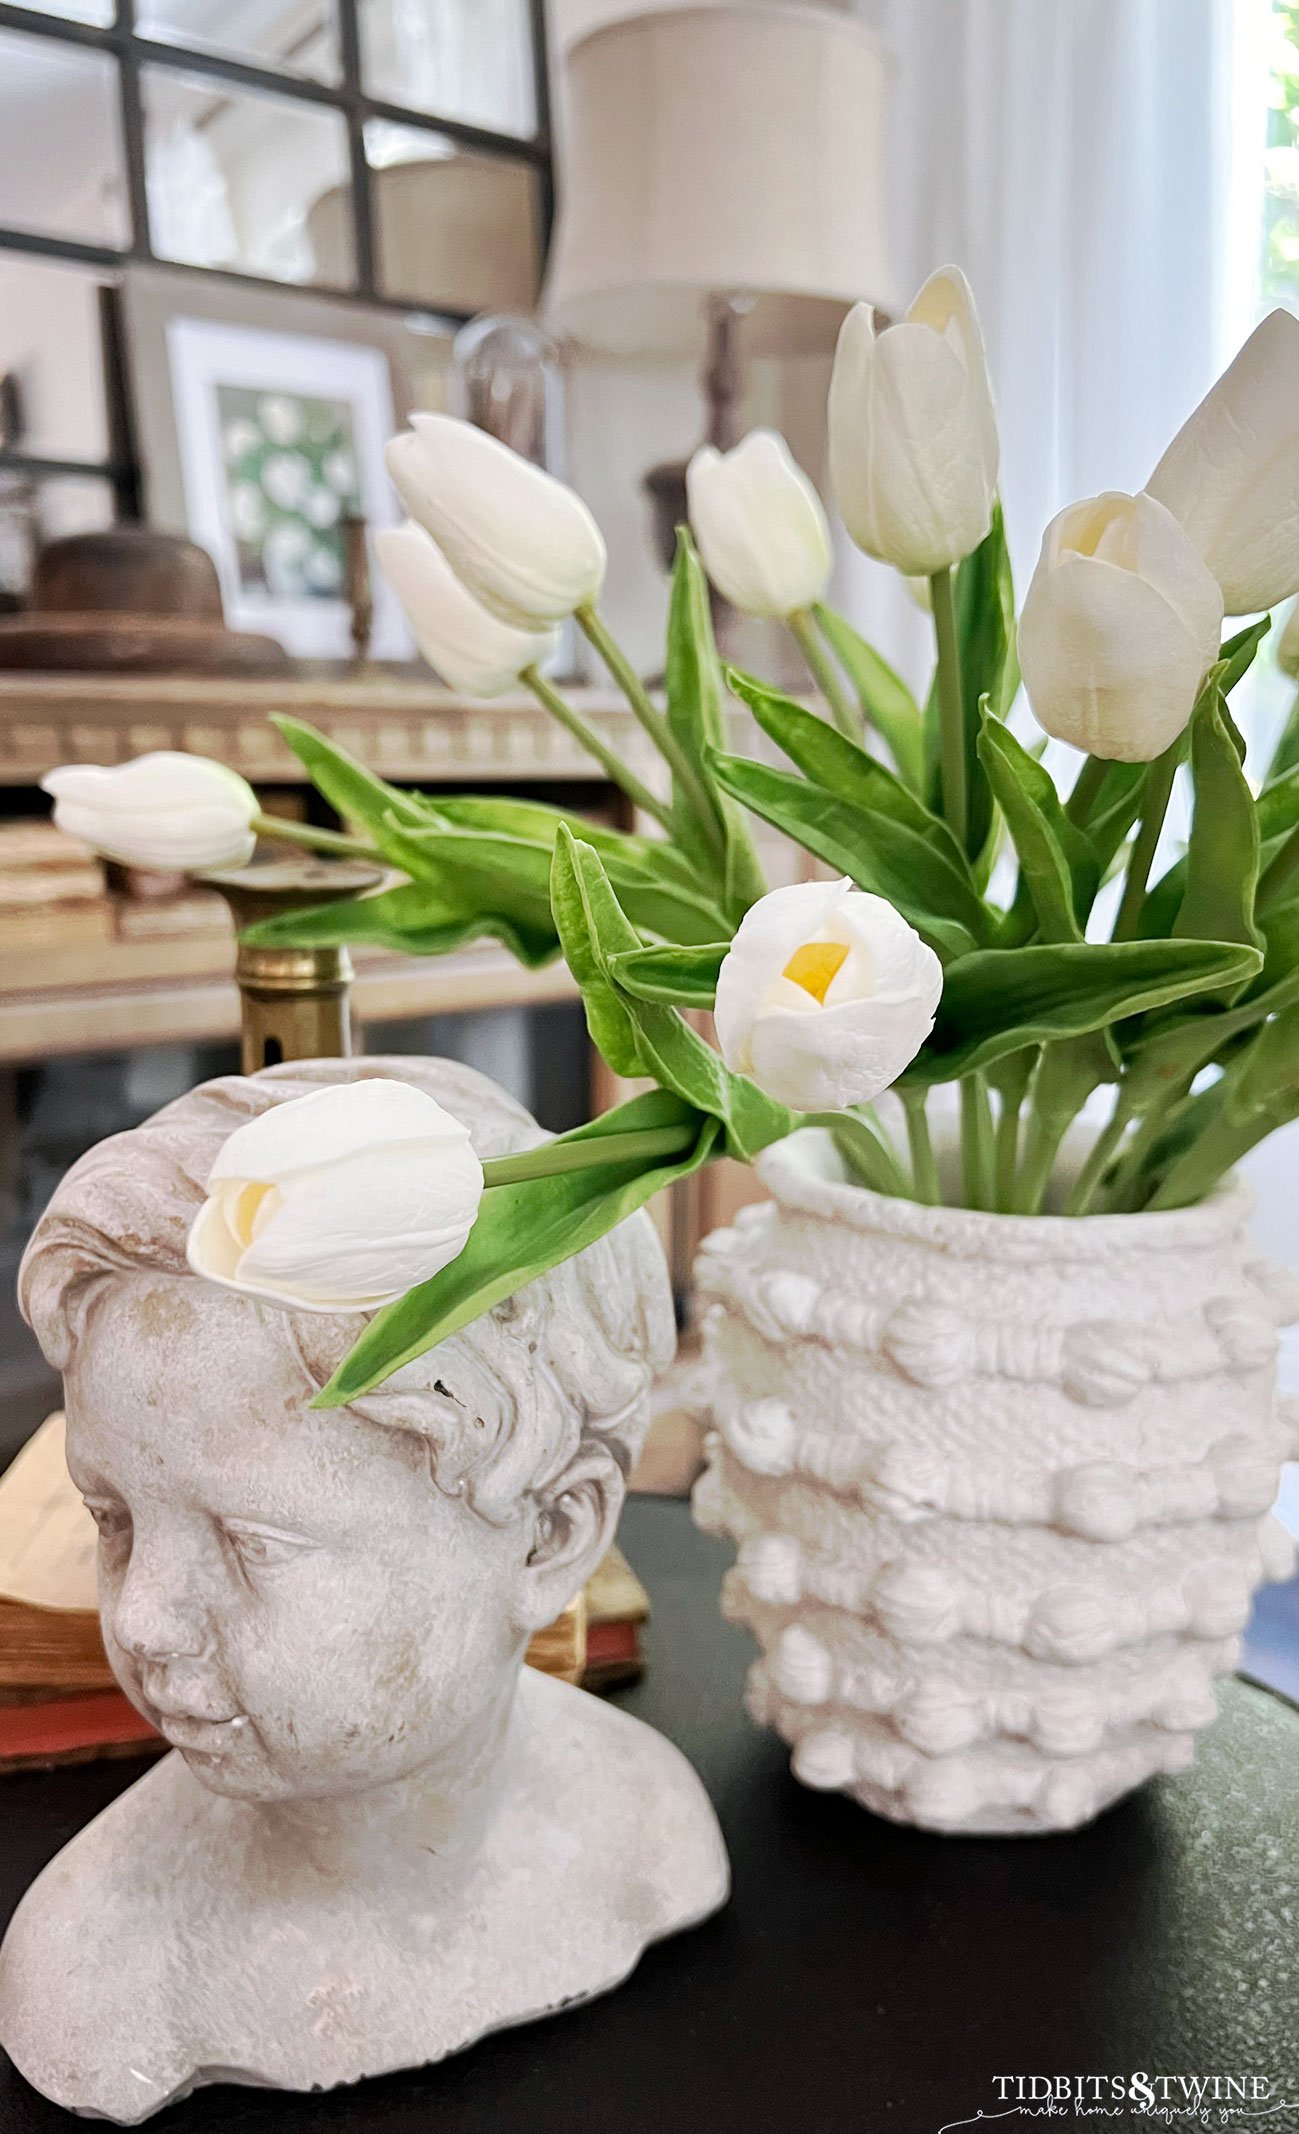 faux white tulips in rustic vase as part of side table vignette next to cherub statue head